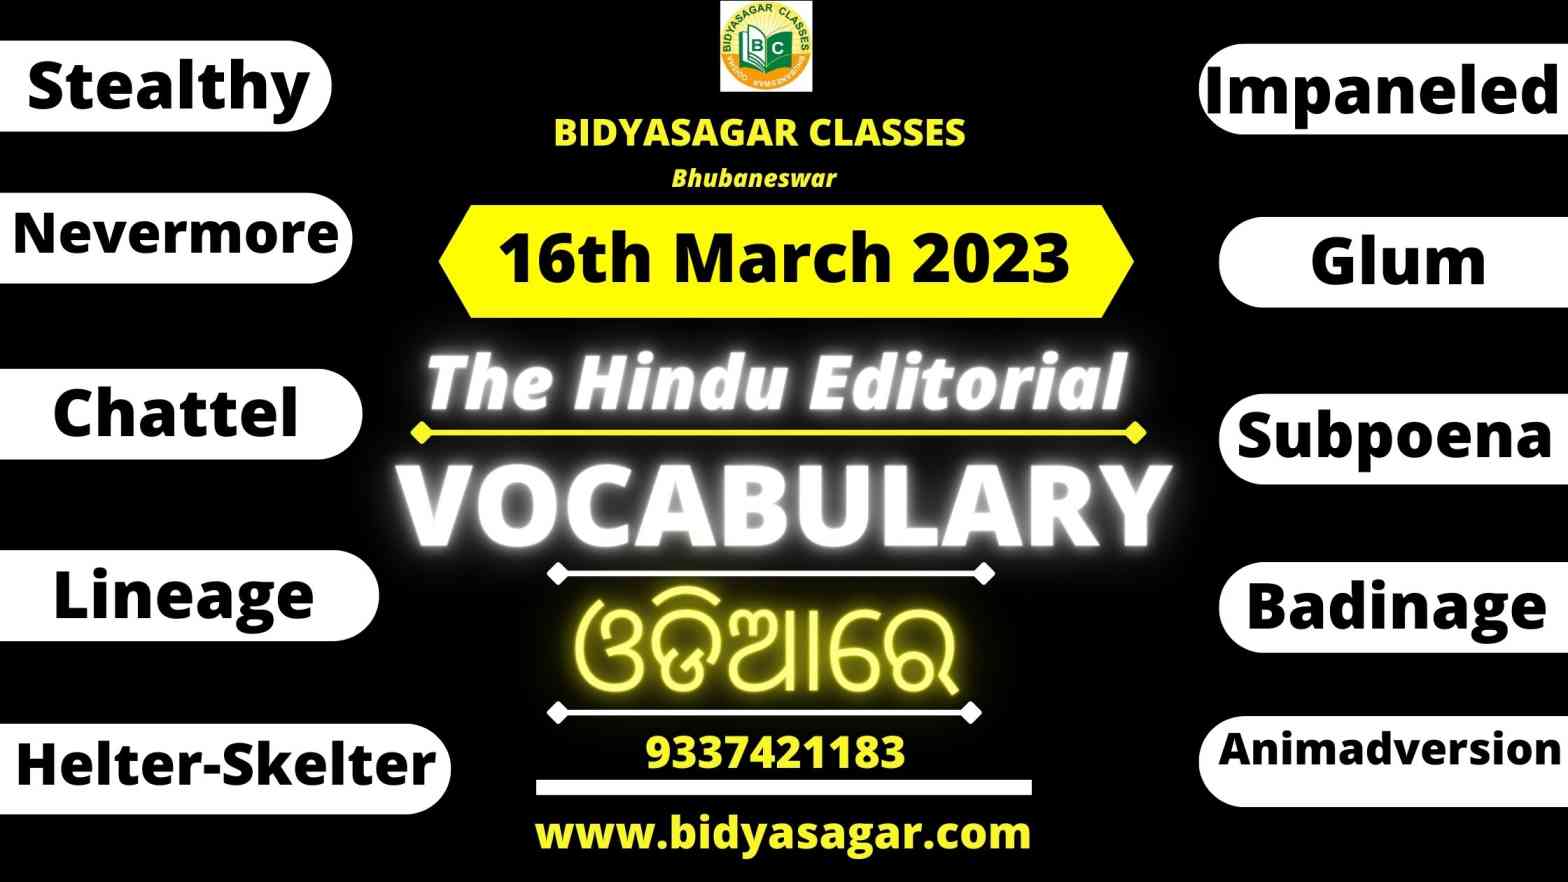 The Hindu Editorial Vocabulary of 16th March 2023